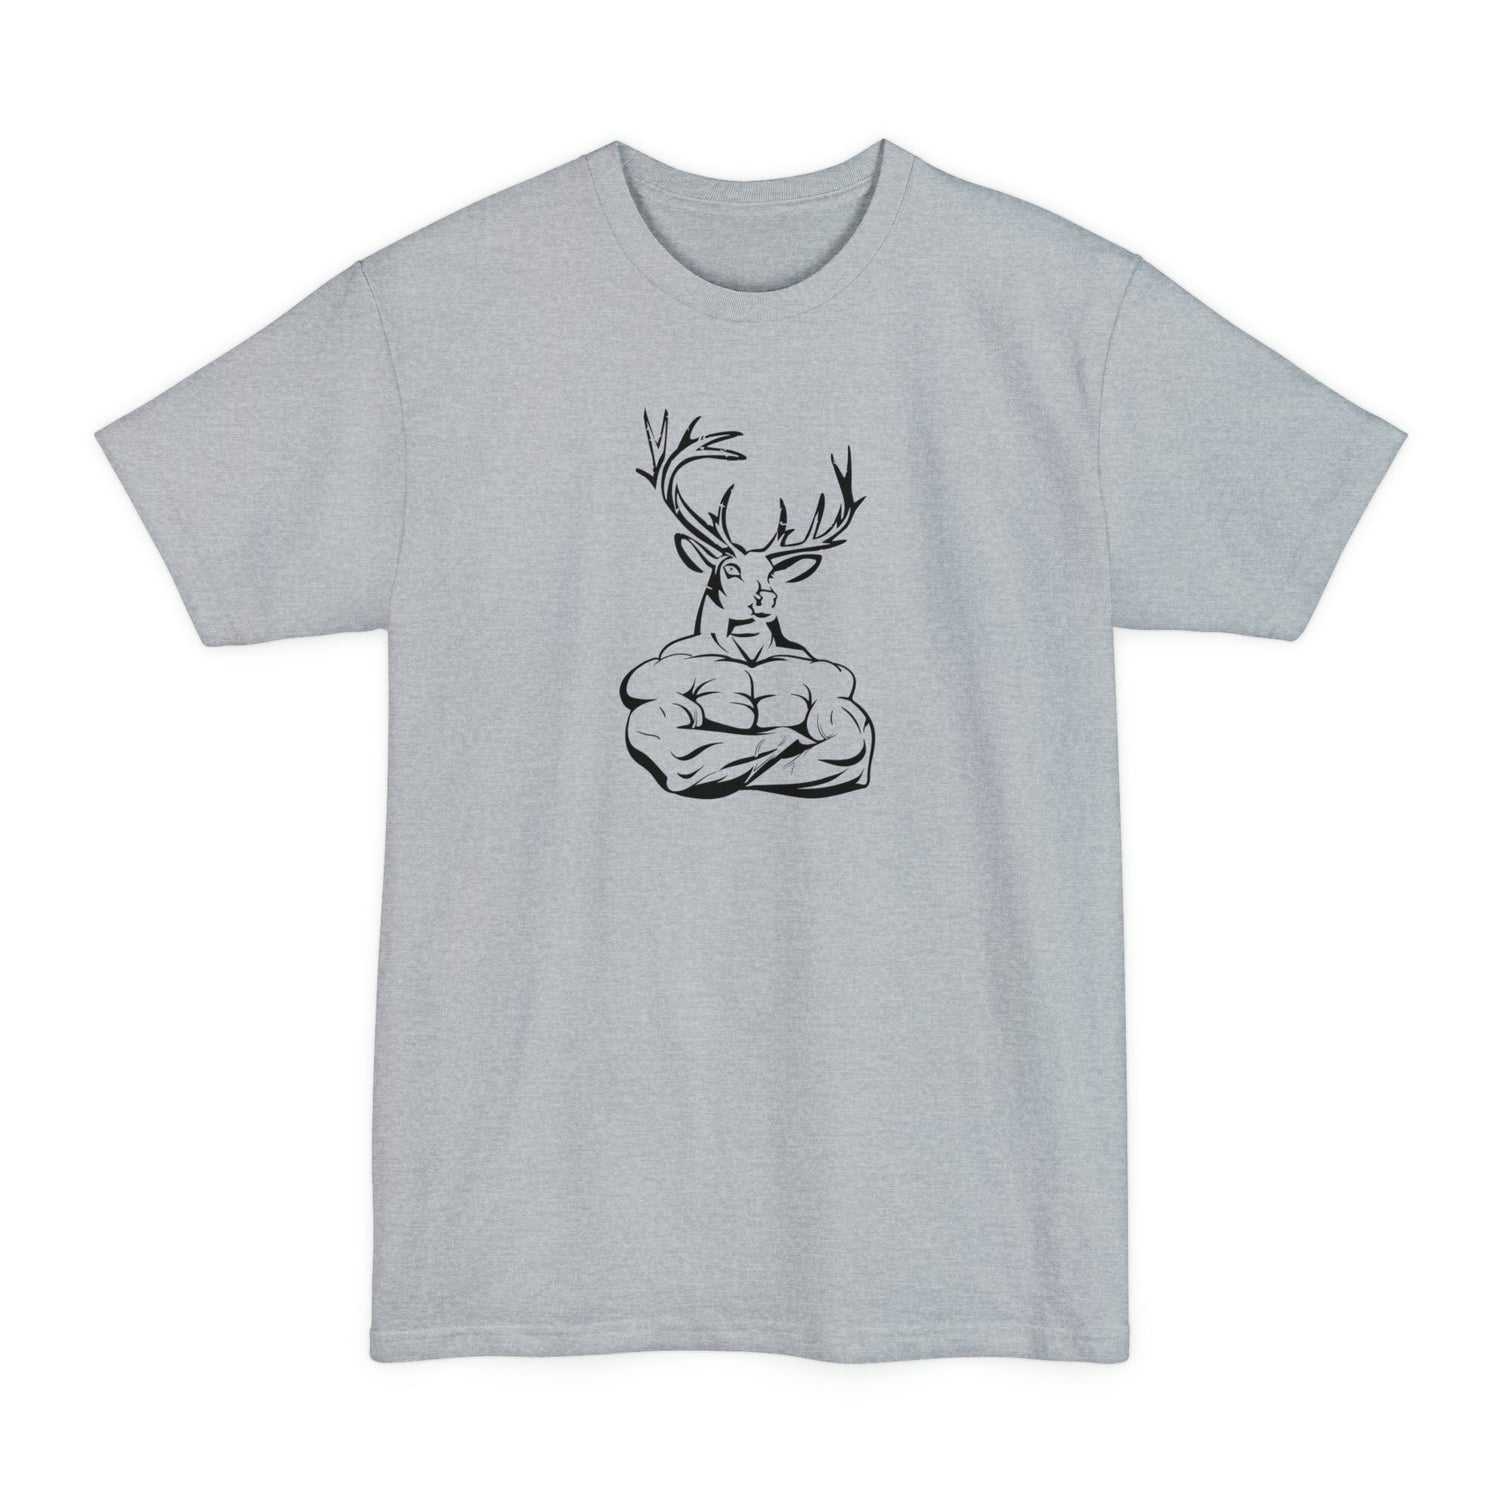 Big and tall deer hunting t-shirt, color light grey, back design placement